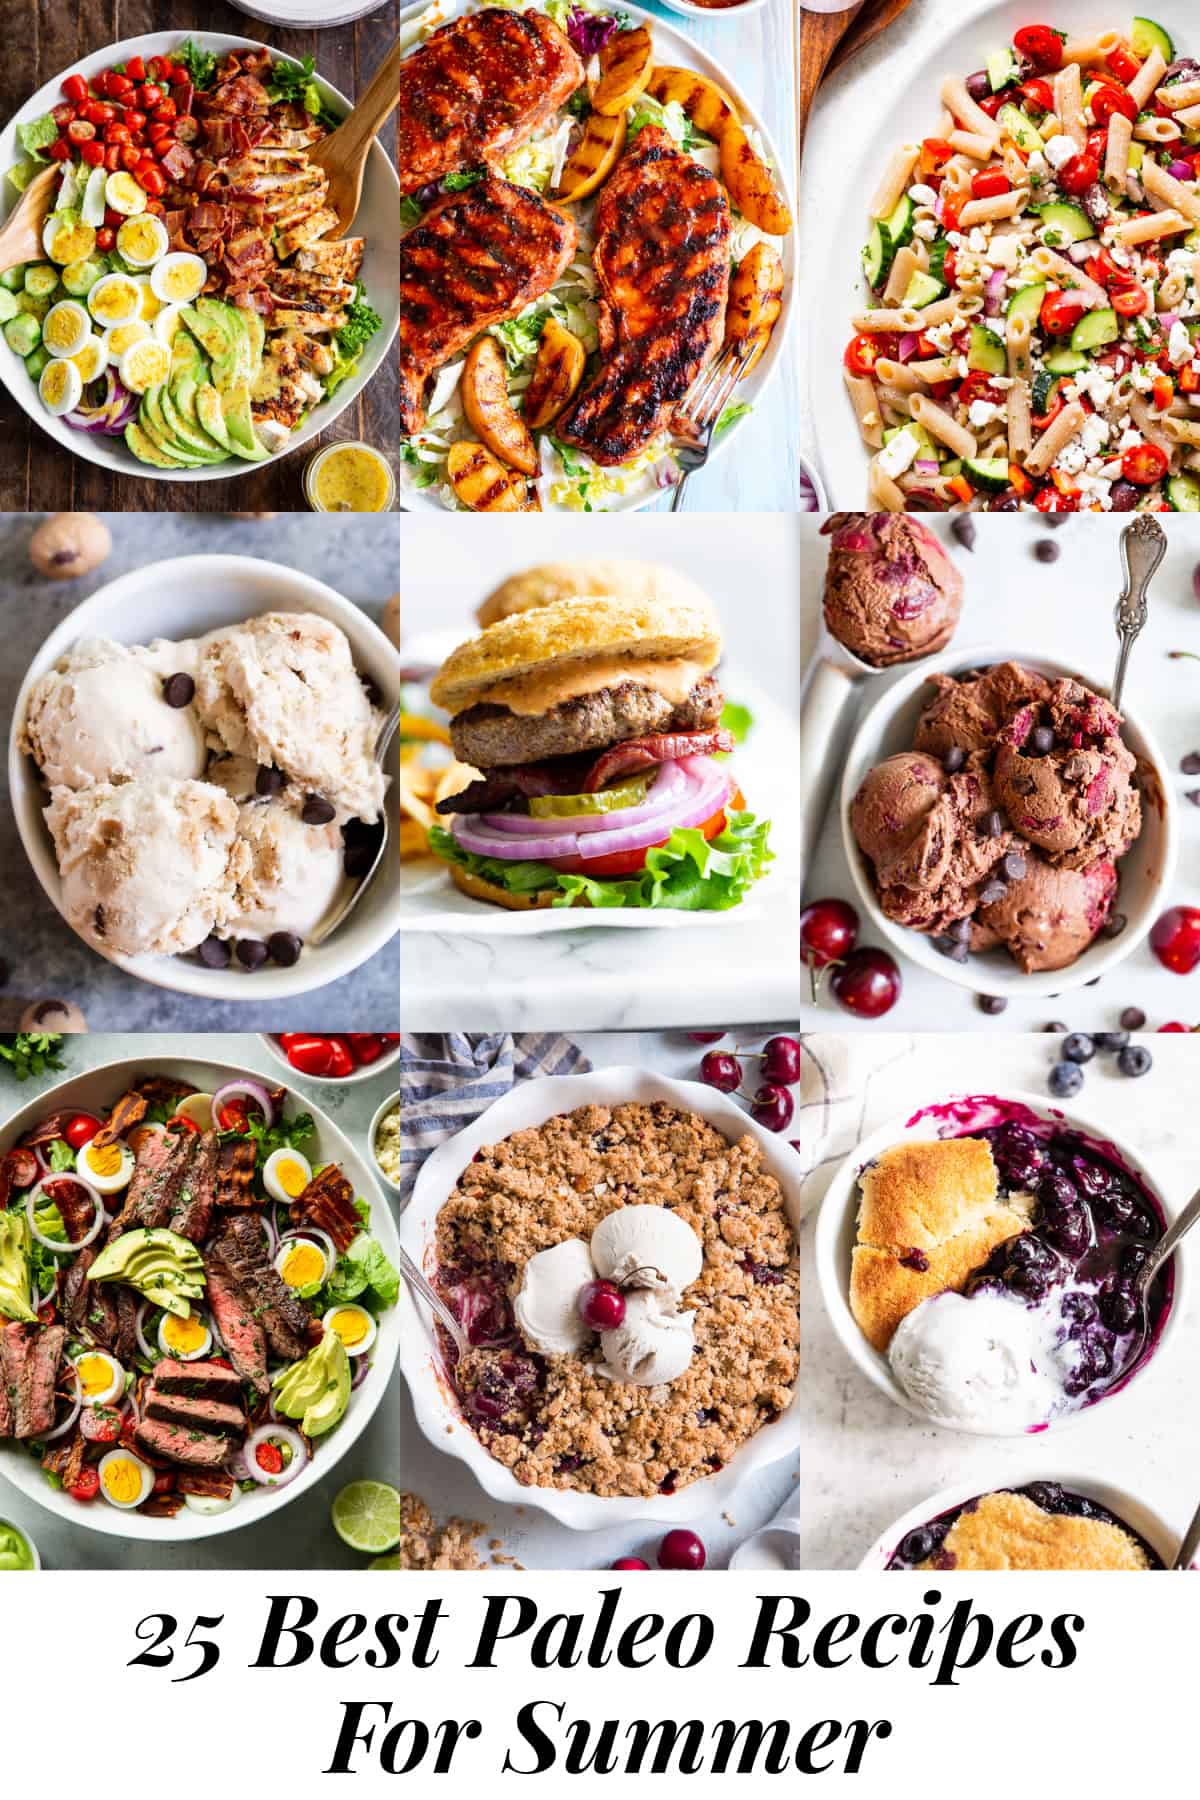 The 25 Best Paleo Recipes for Summer - The Paleo Running Momma